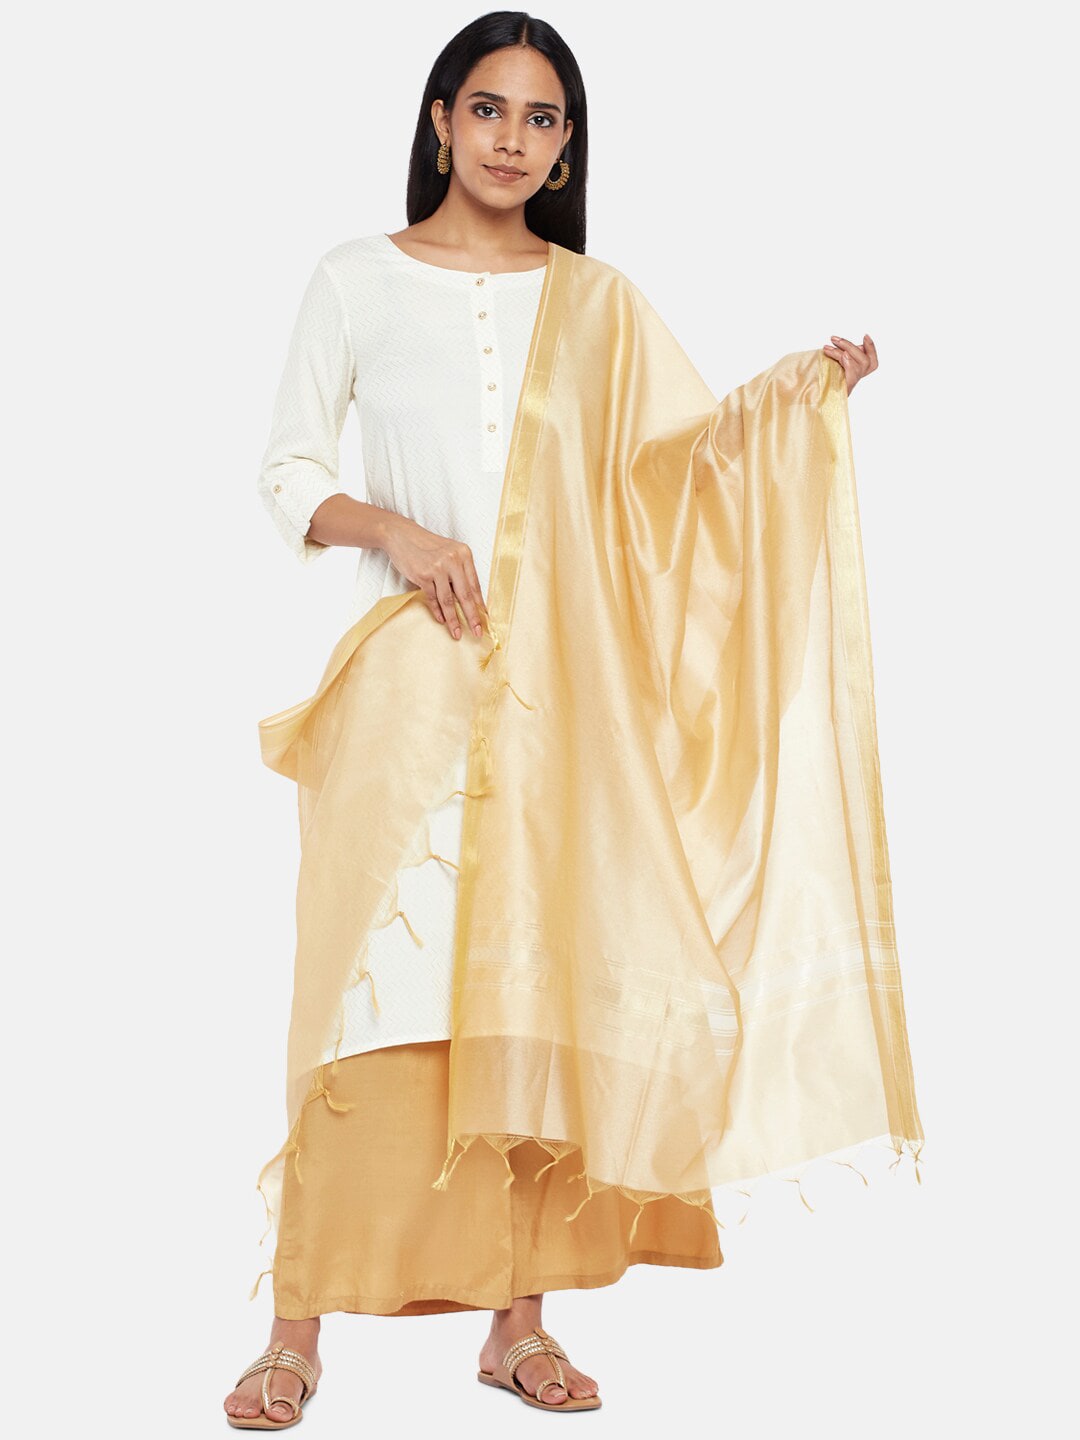 RANGMANCH BY PANTALOONS Gold-Toned Solid Dupatta Price in India